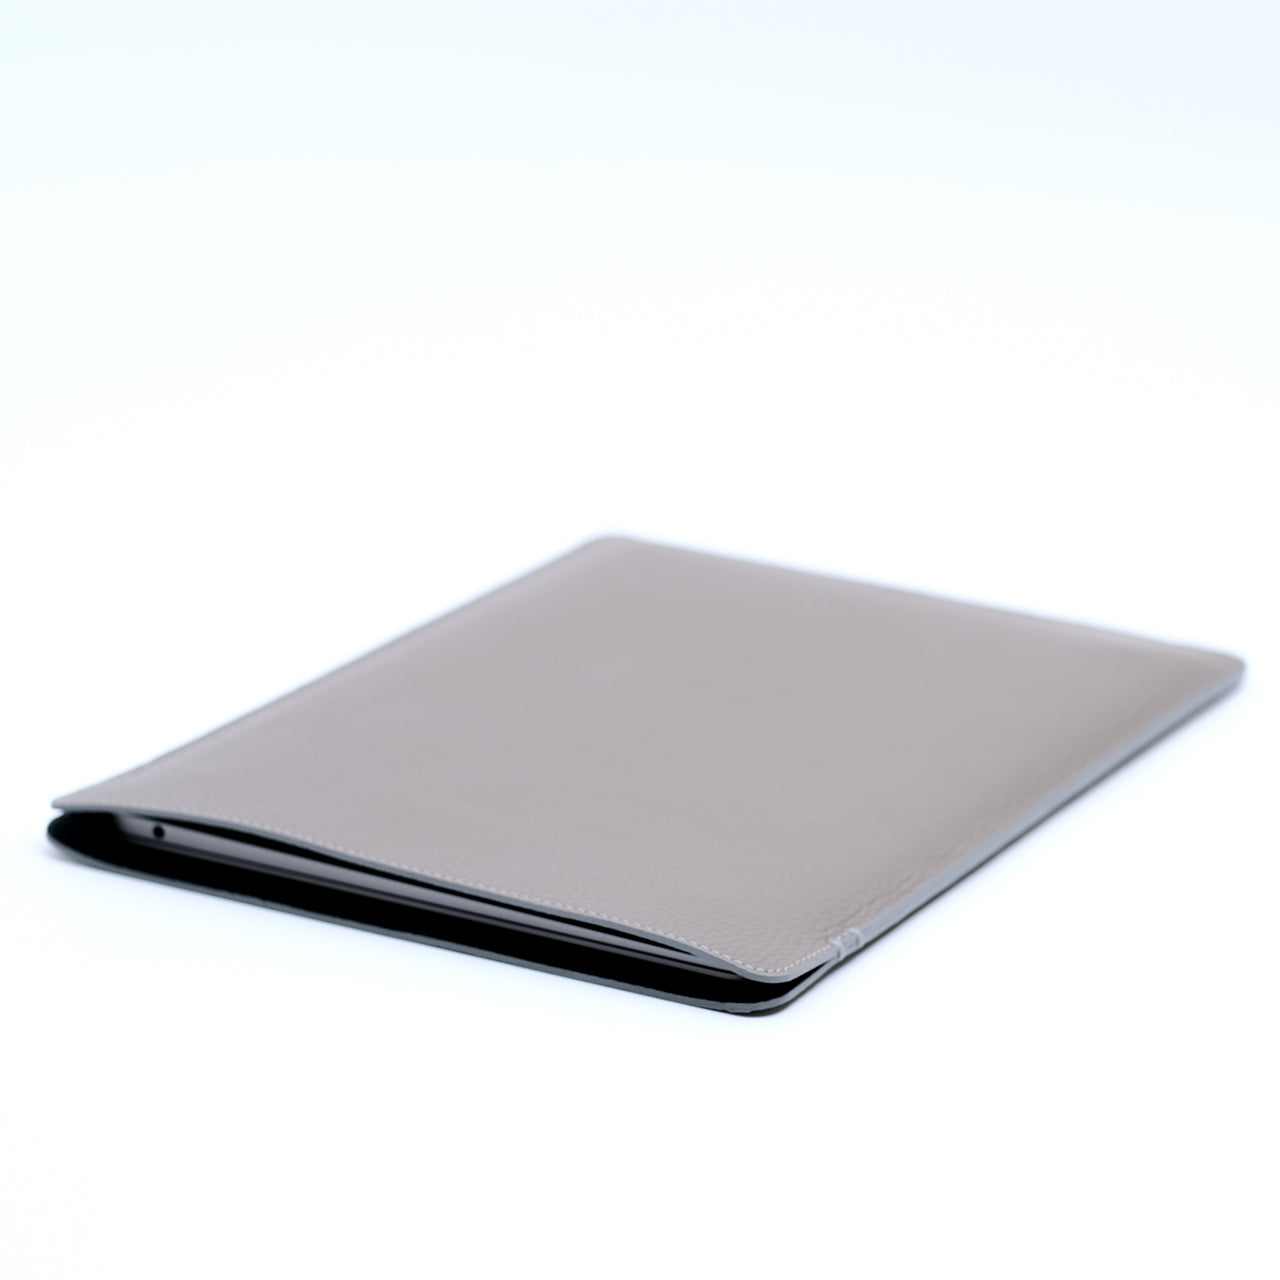 Carry MacBook Air 13inch slim, thin but solid sleeve case